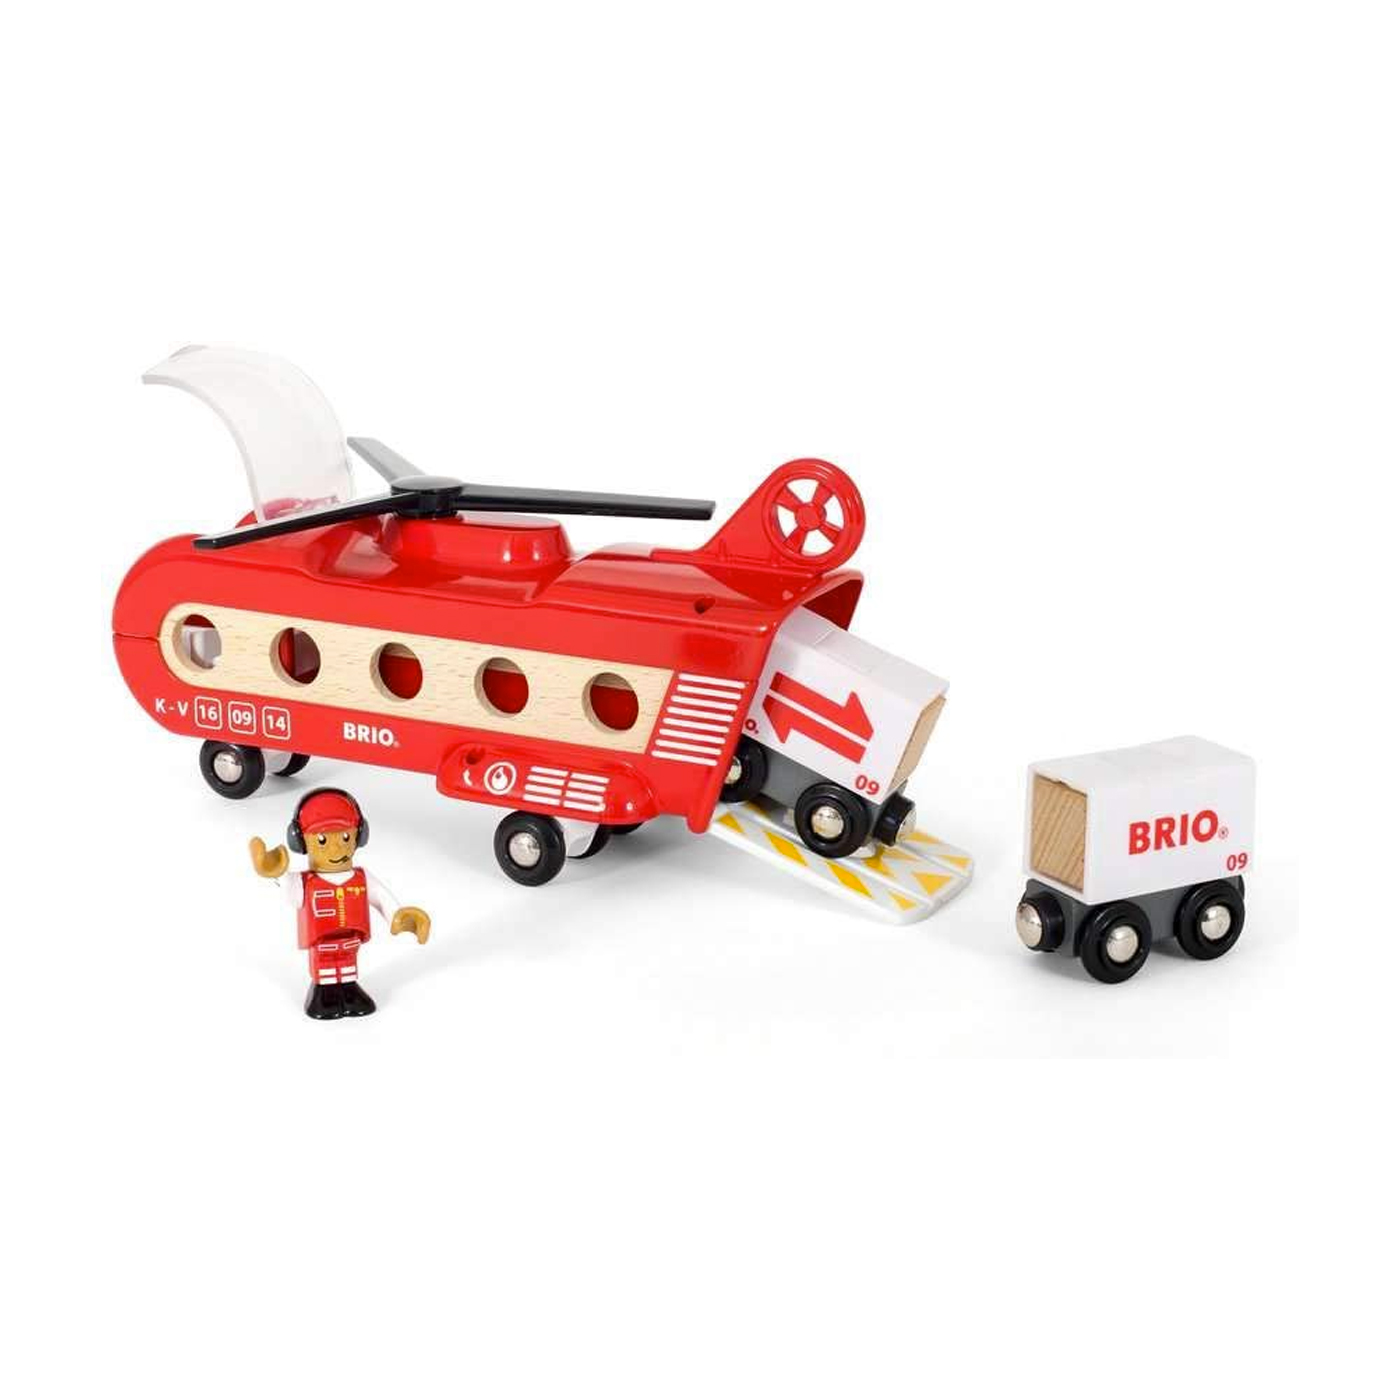  Brio Transport Helicopter